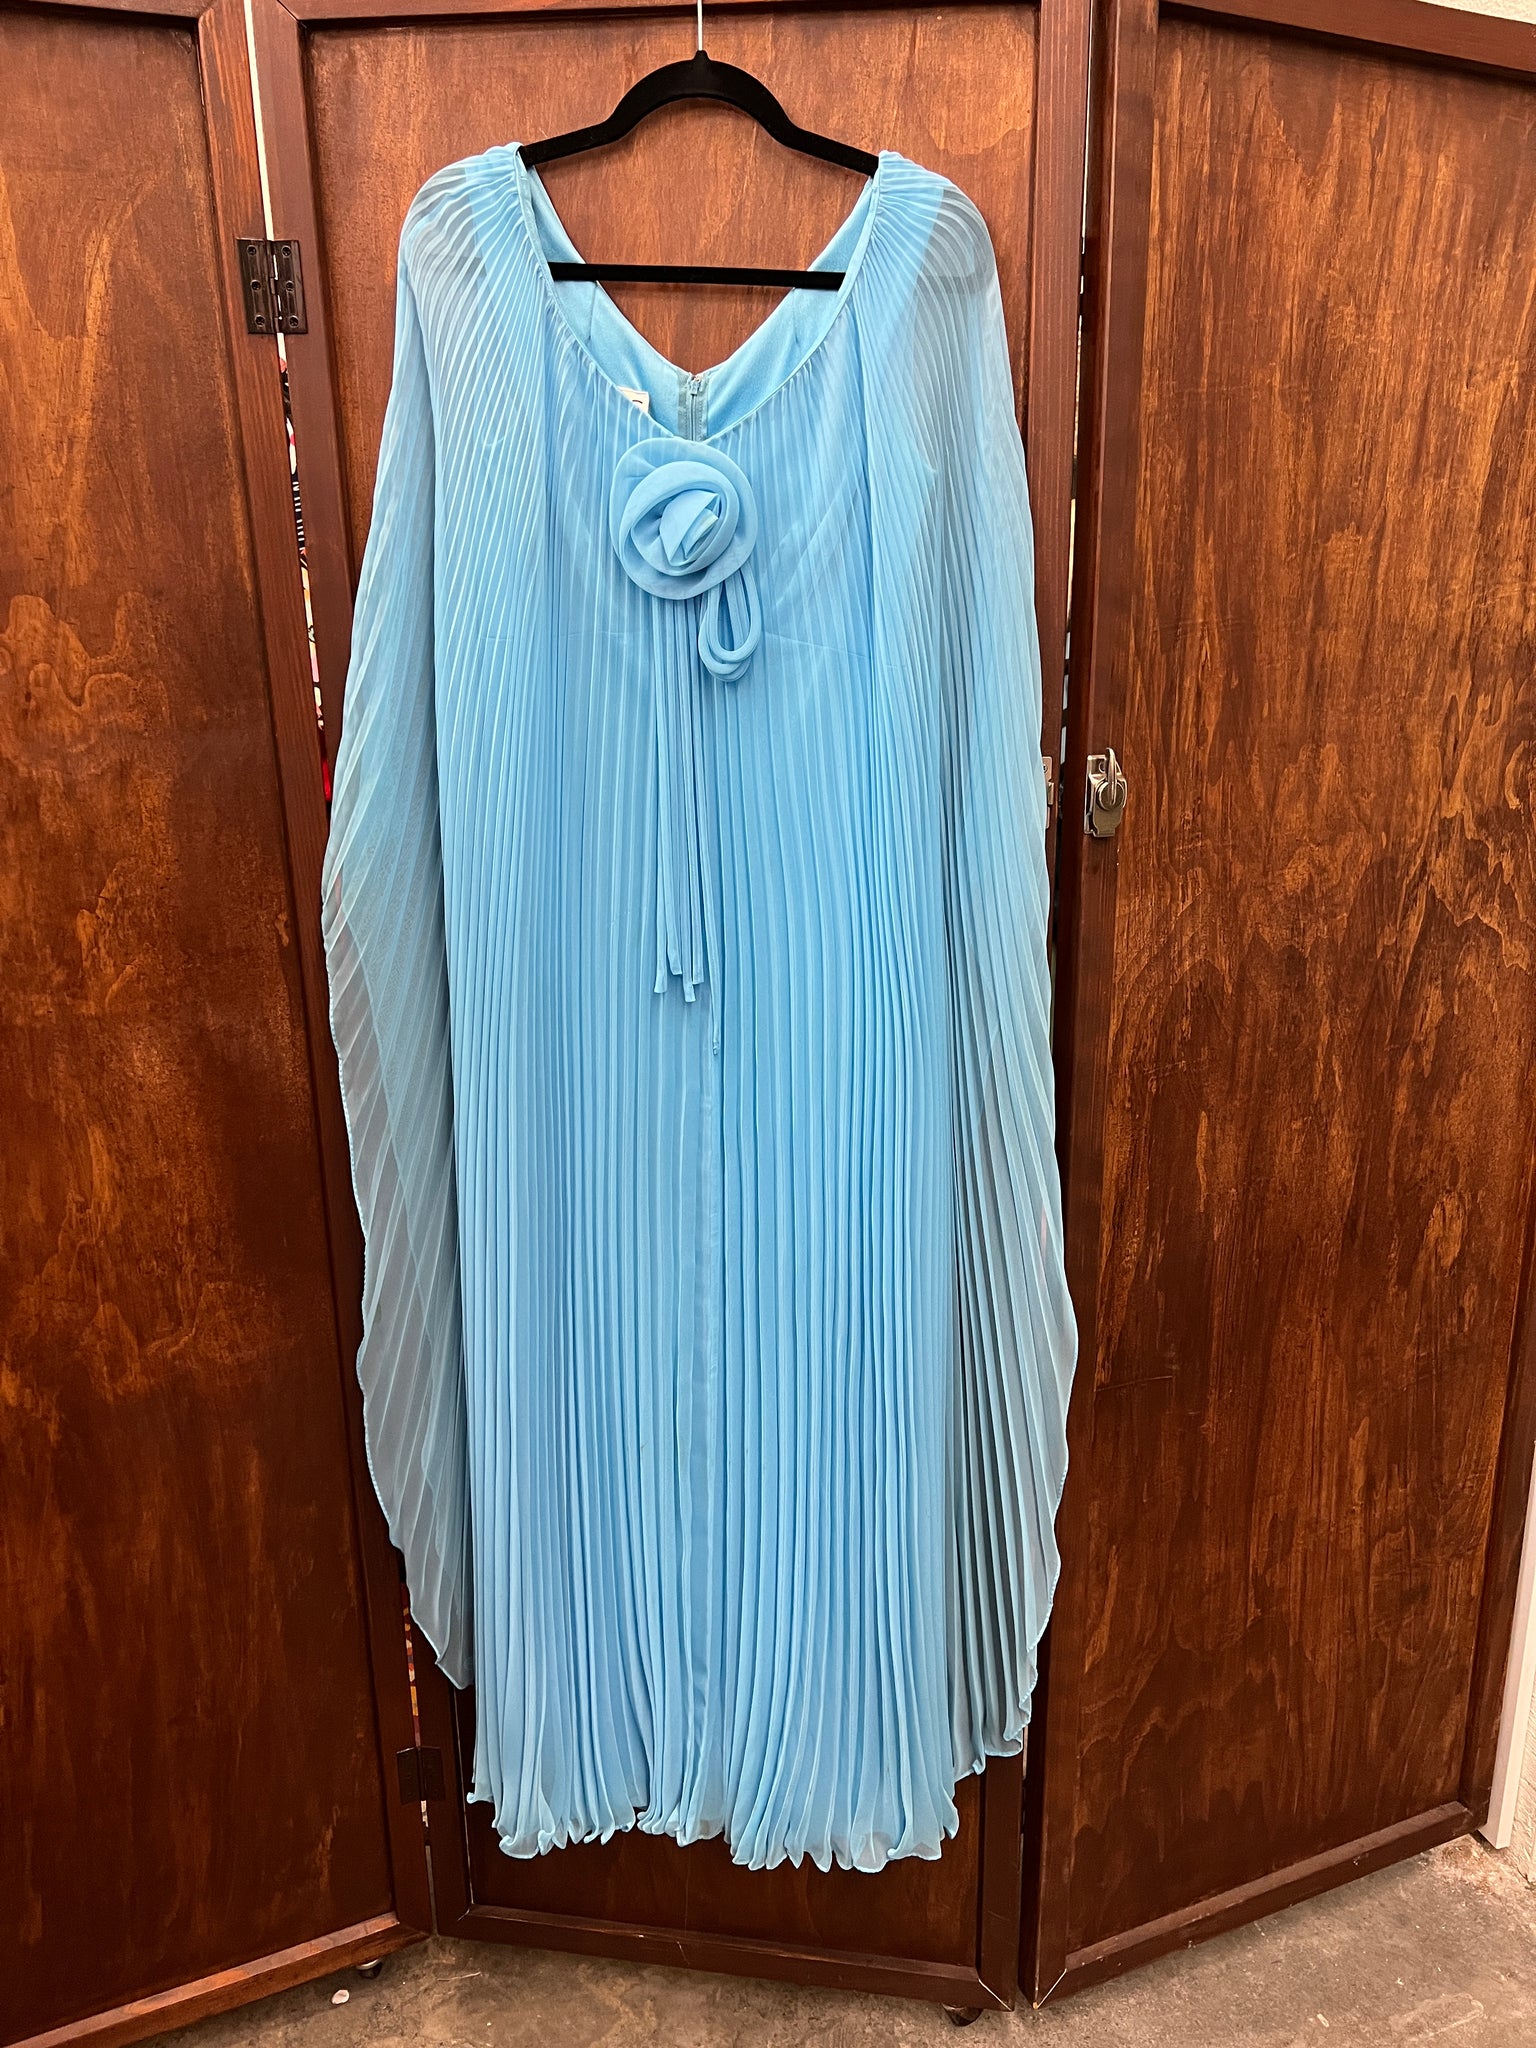 1960S DRESS- Miss Elliette Blue maxi w/ attached sheer overlay